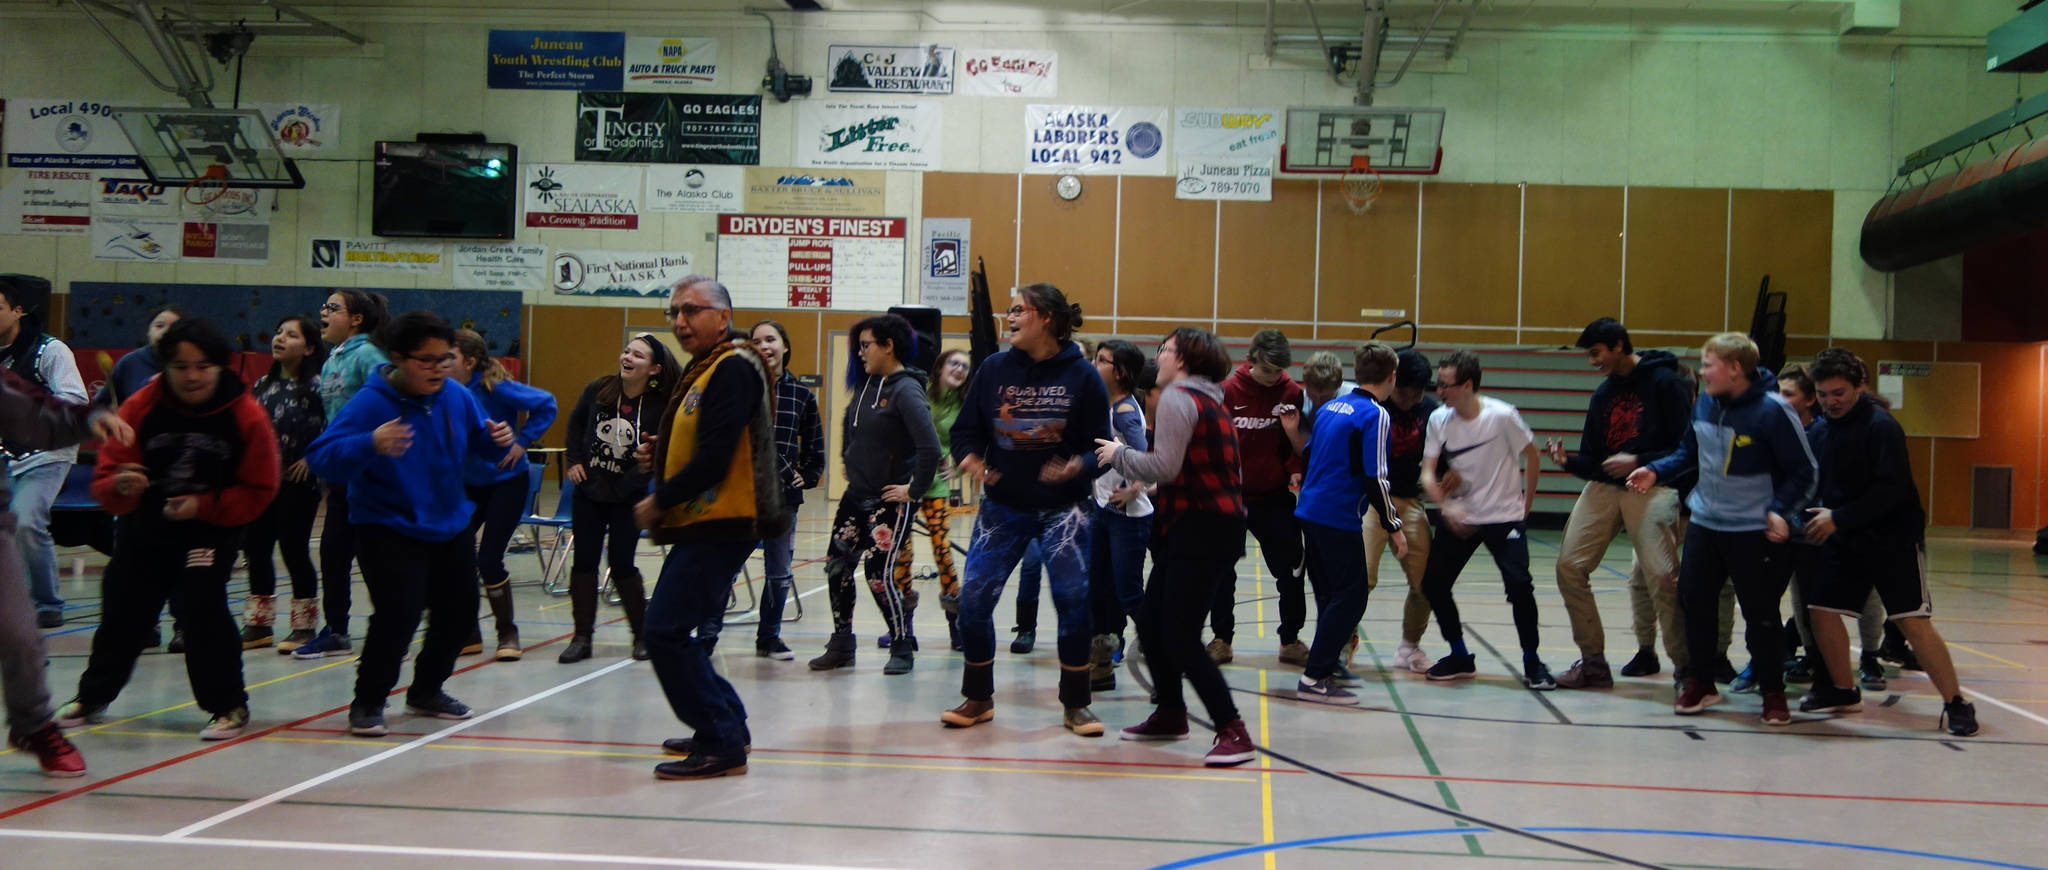 Floyd Dryden Middle School students take to the gymnasium floor to dance along with students singing a Tlingit song about respecting elders and community members at the “Transfer of Core Cultural Values Panels Ceremony” at Floyd Dryden Middle School on Wednesday, Nov. 22. (Clara Miller | Capital City Weekly)